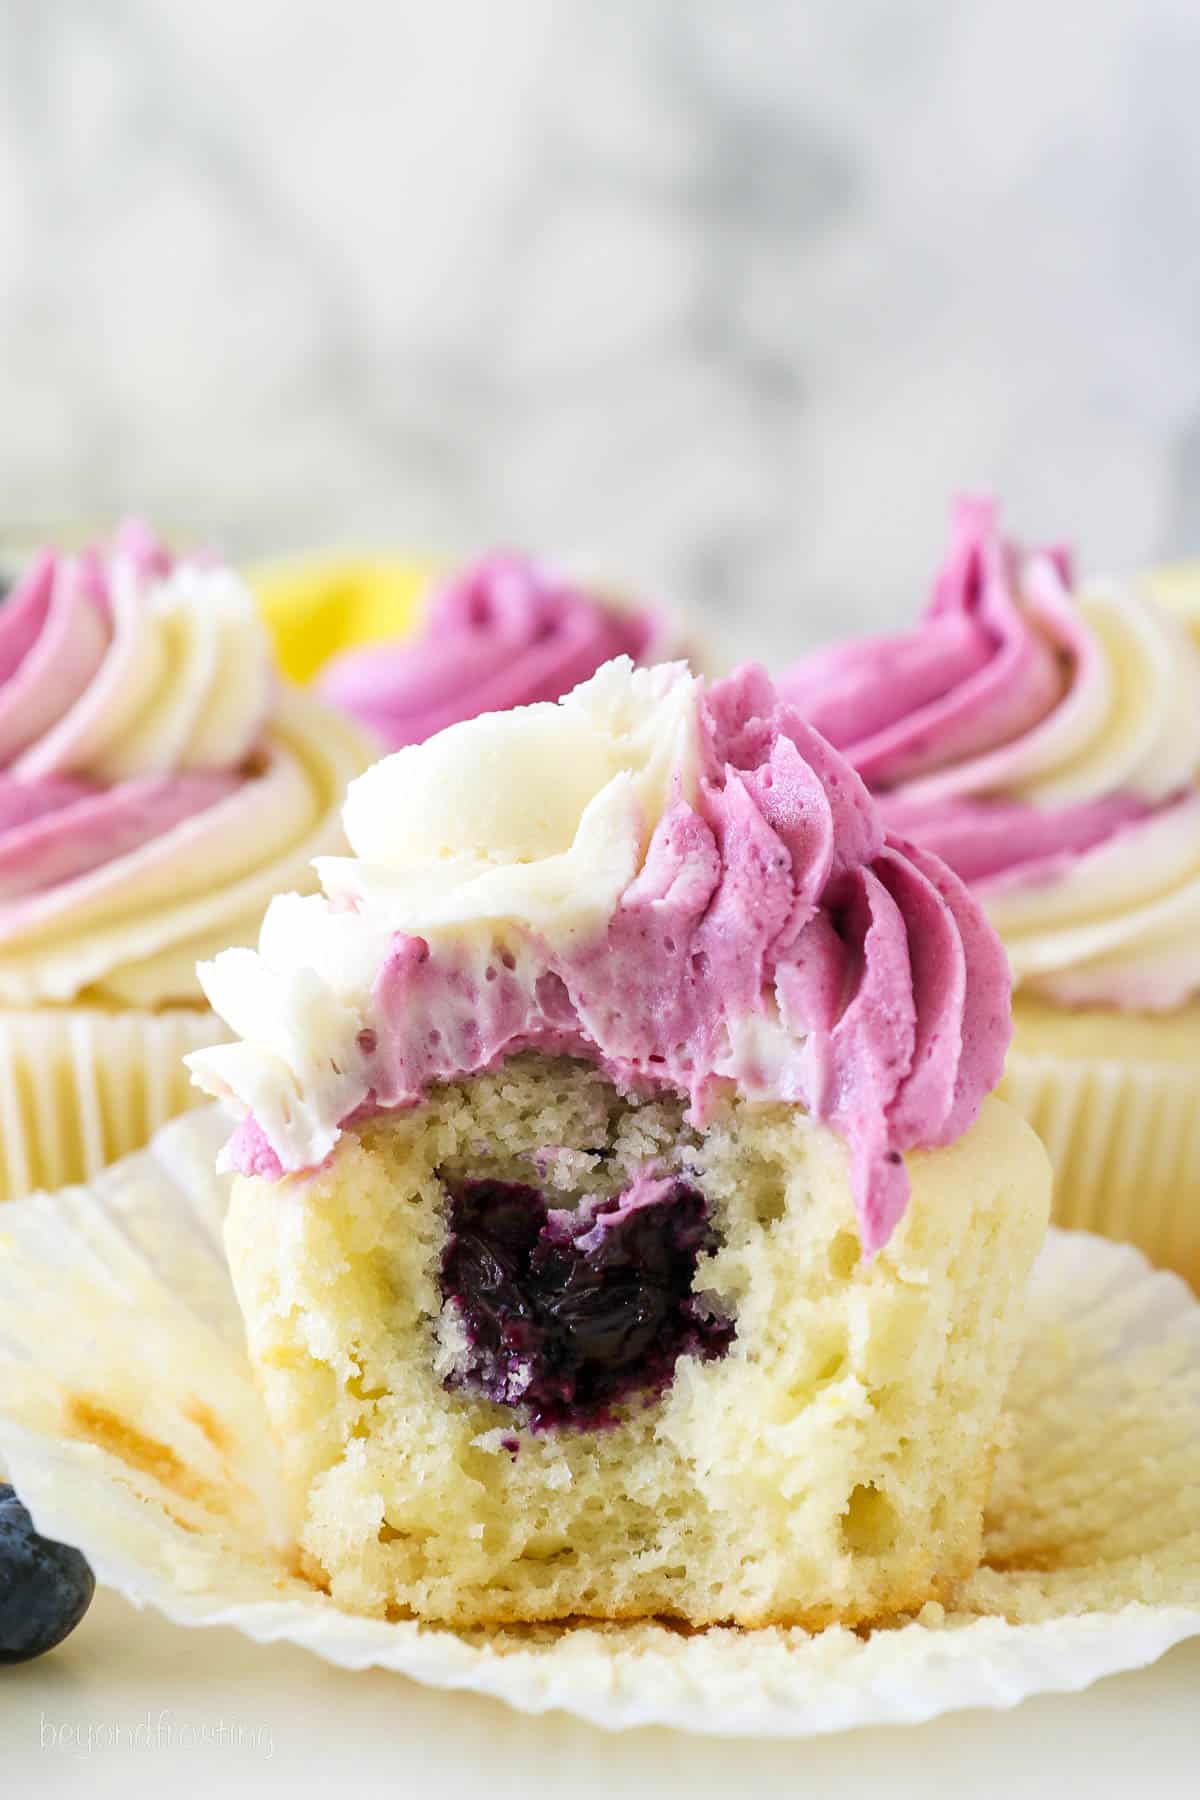 A cupcake with a bite missing to show the blueberry filling inside. It's frosted with a vanilla and blueberry swirled frosting